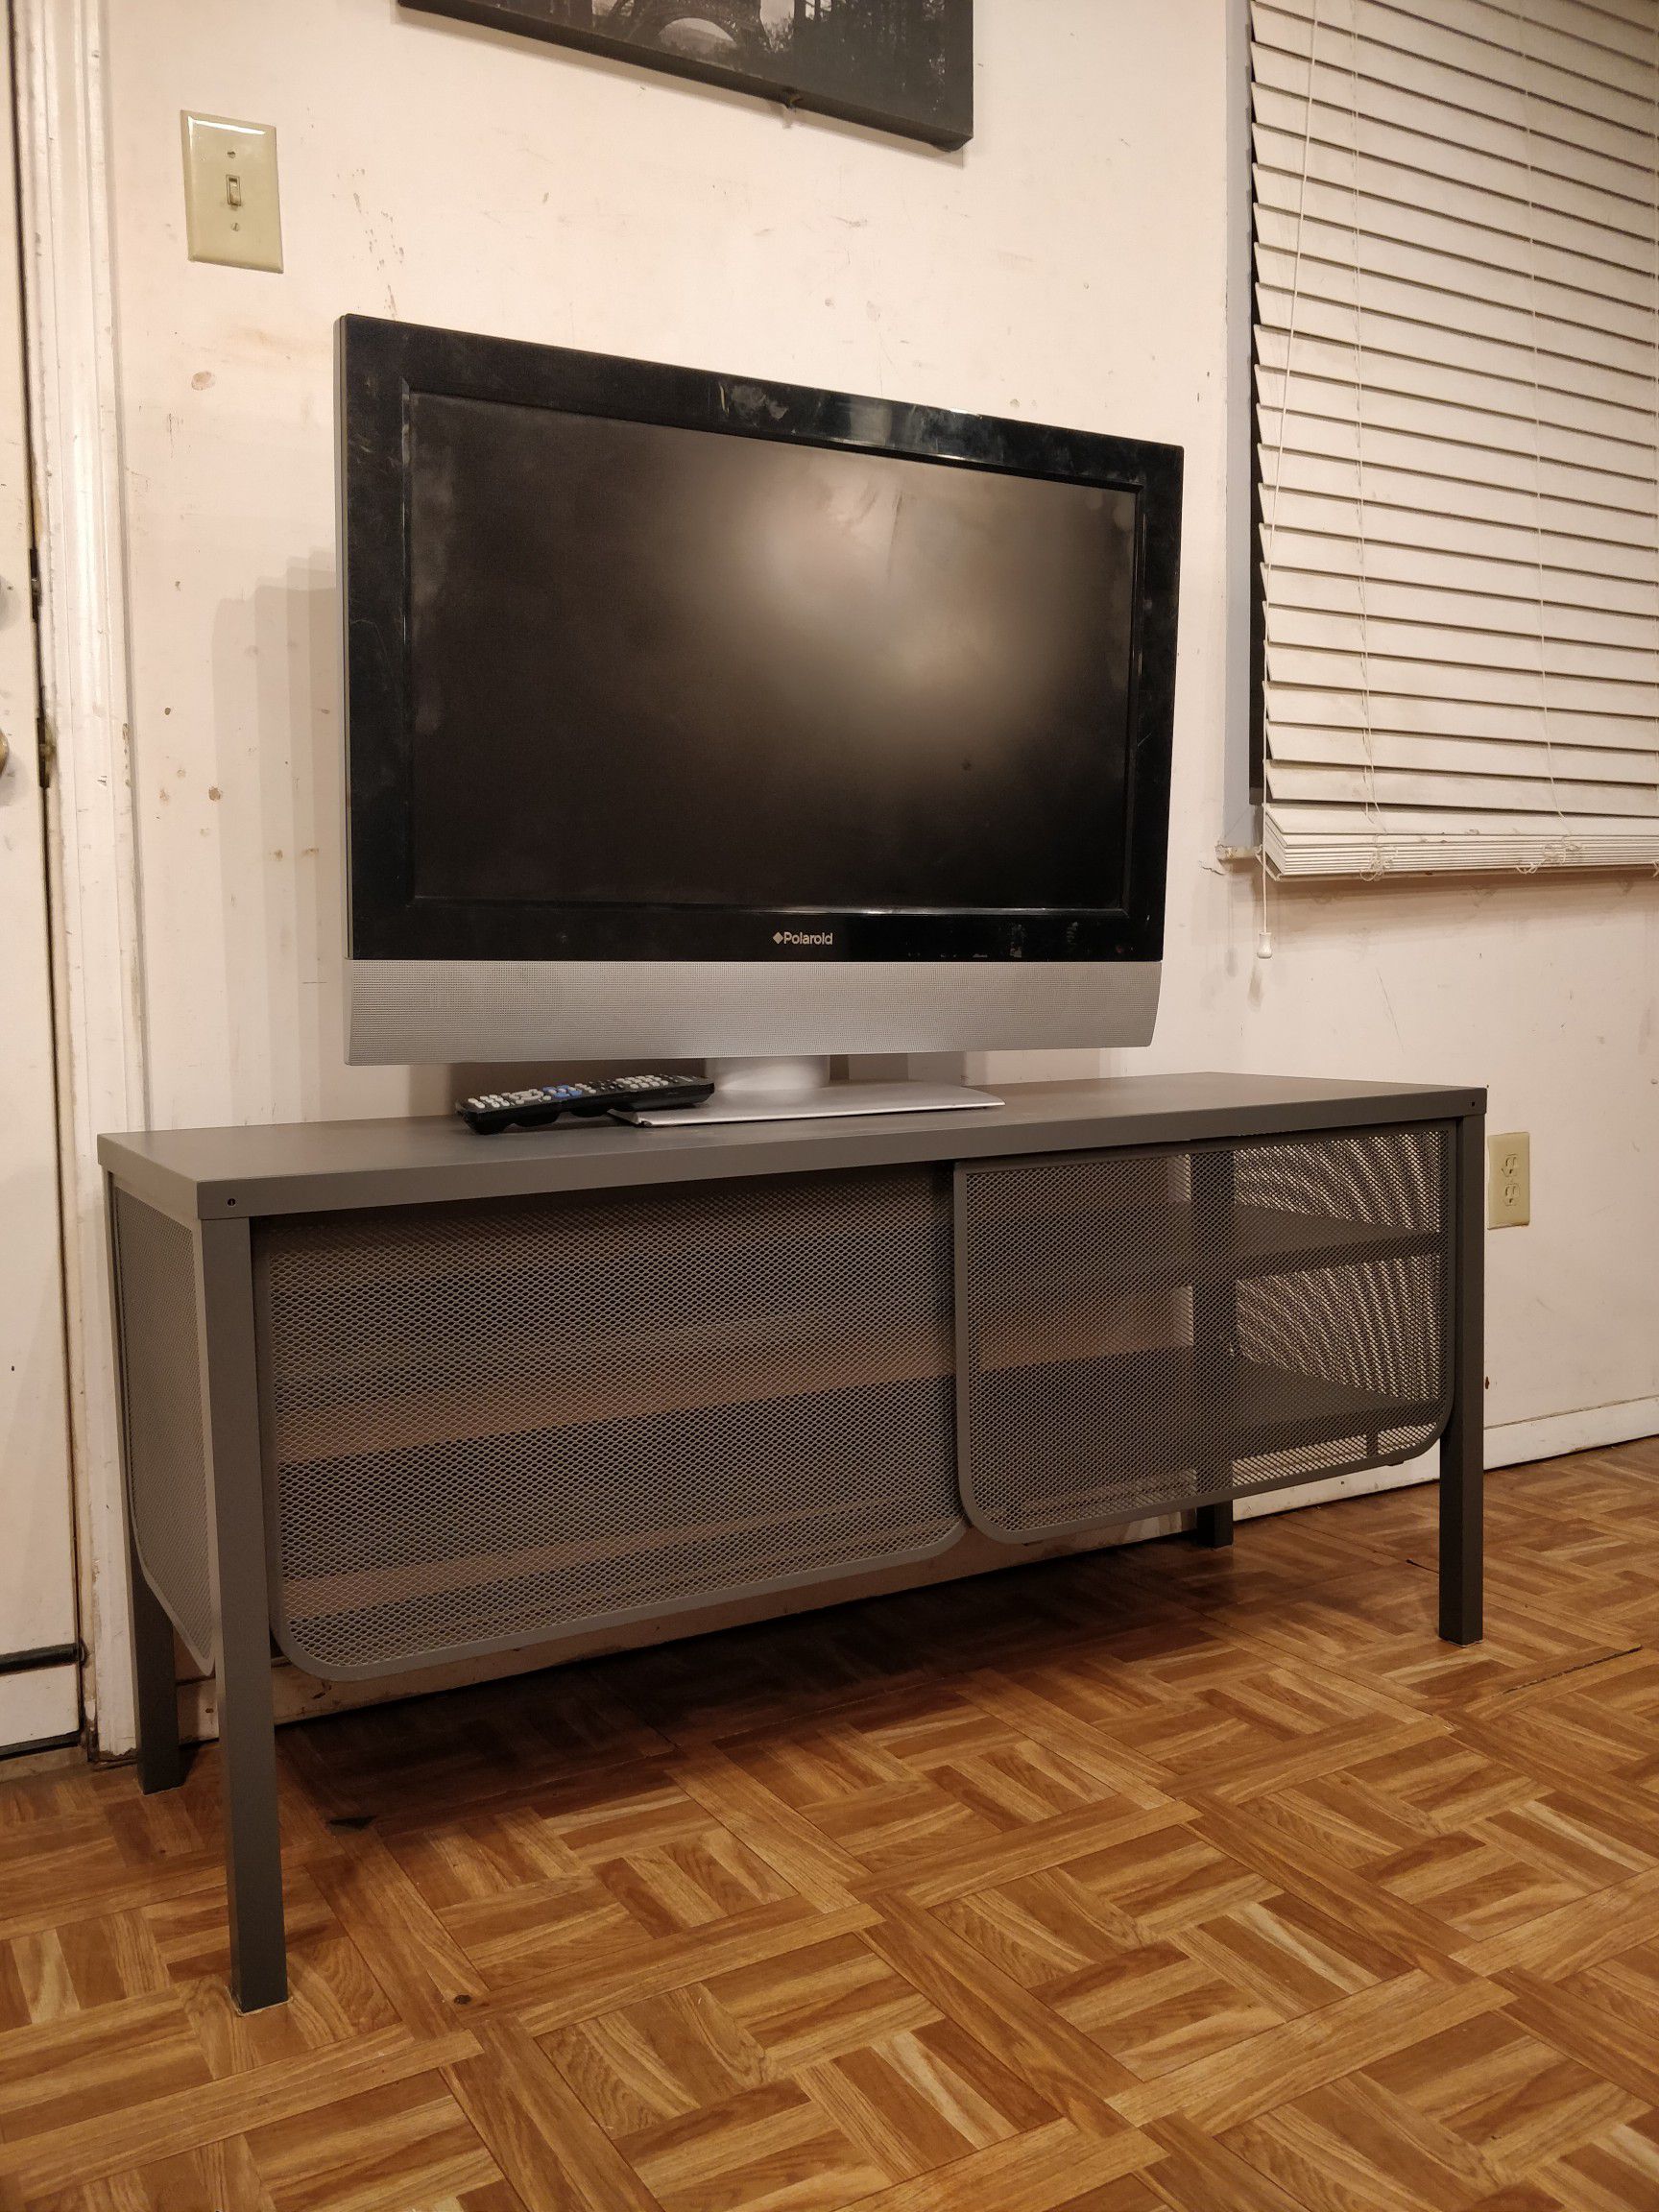 Like new metal TV stand for big TVs with 2 shelves in great condition. L48"*W15.5"*H23"